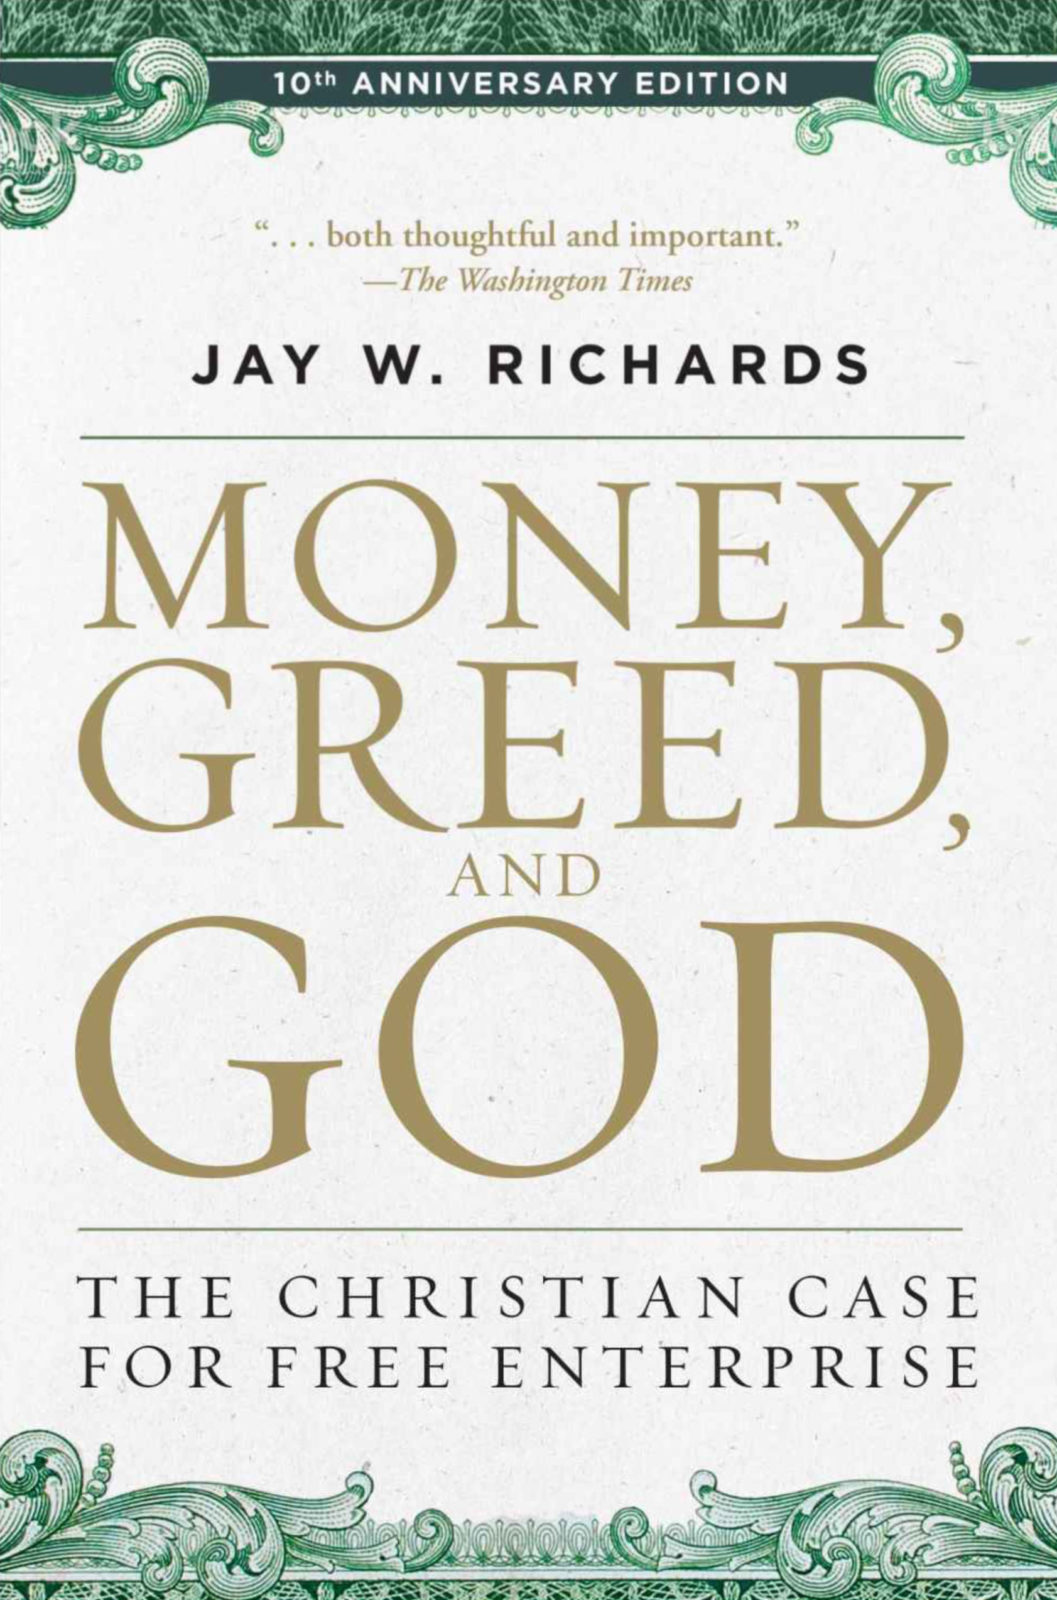 Book cover of Money, Greed, and God by Jay W. Richards